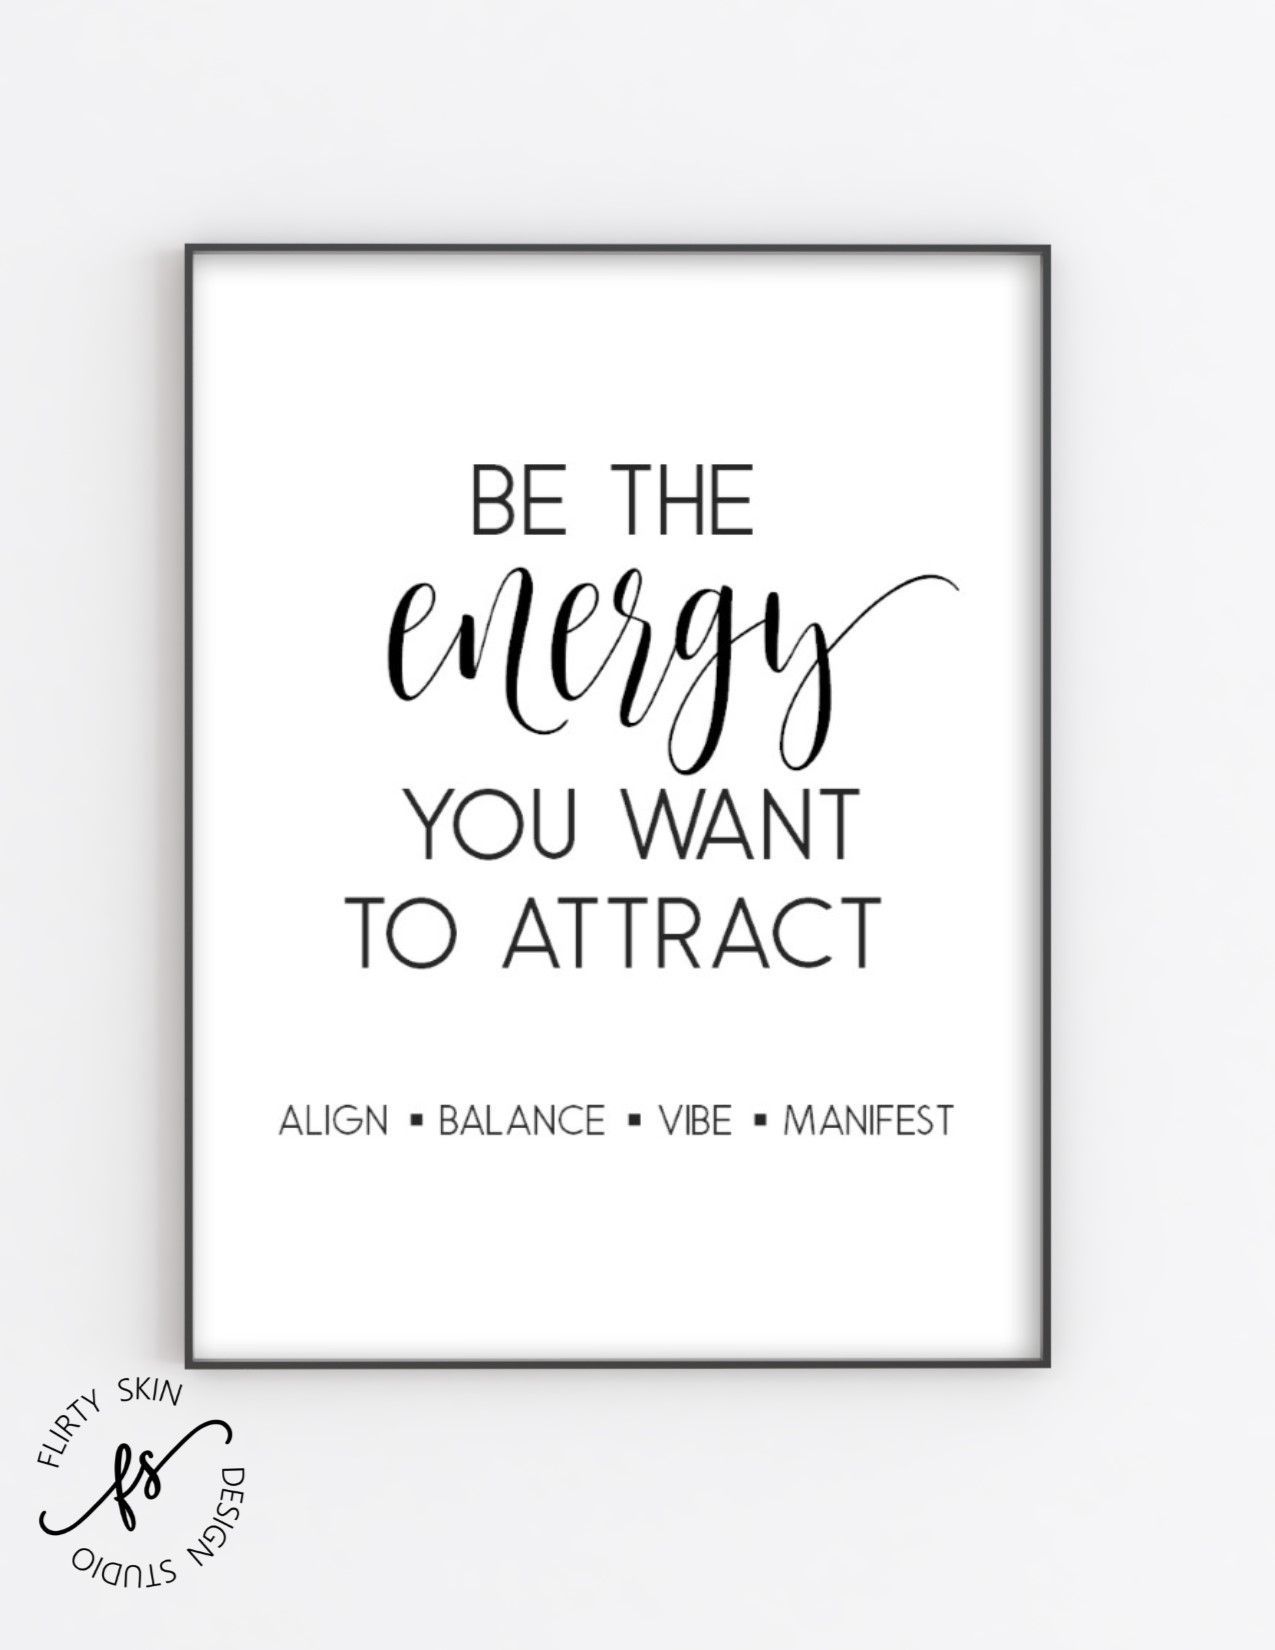 Be The Energy You Want To Attract - Be The Energy You Want To Attract -   18 beauty Therapy marketing ideas